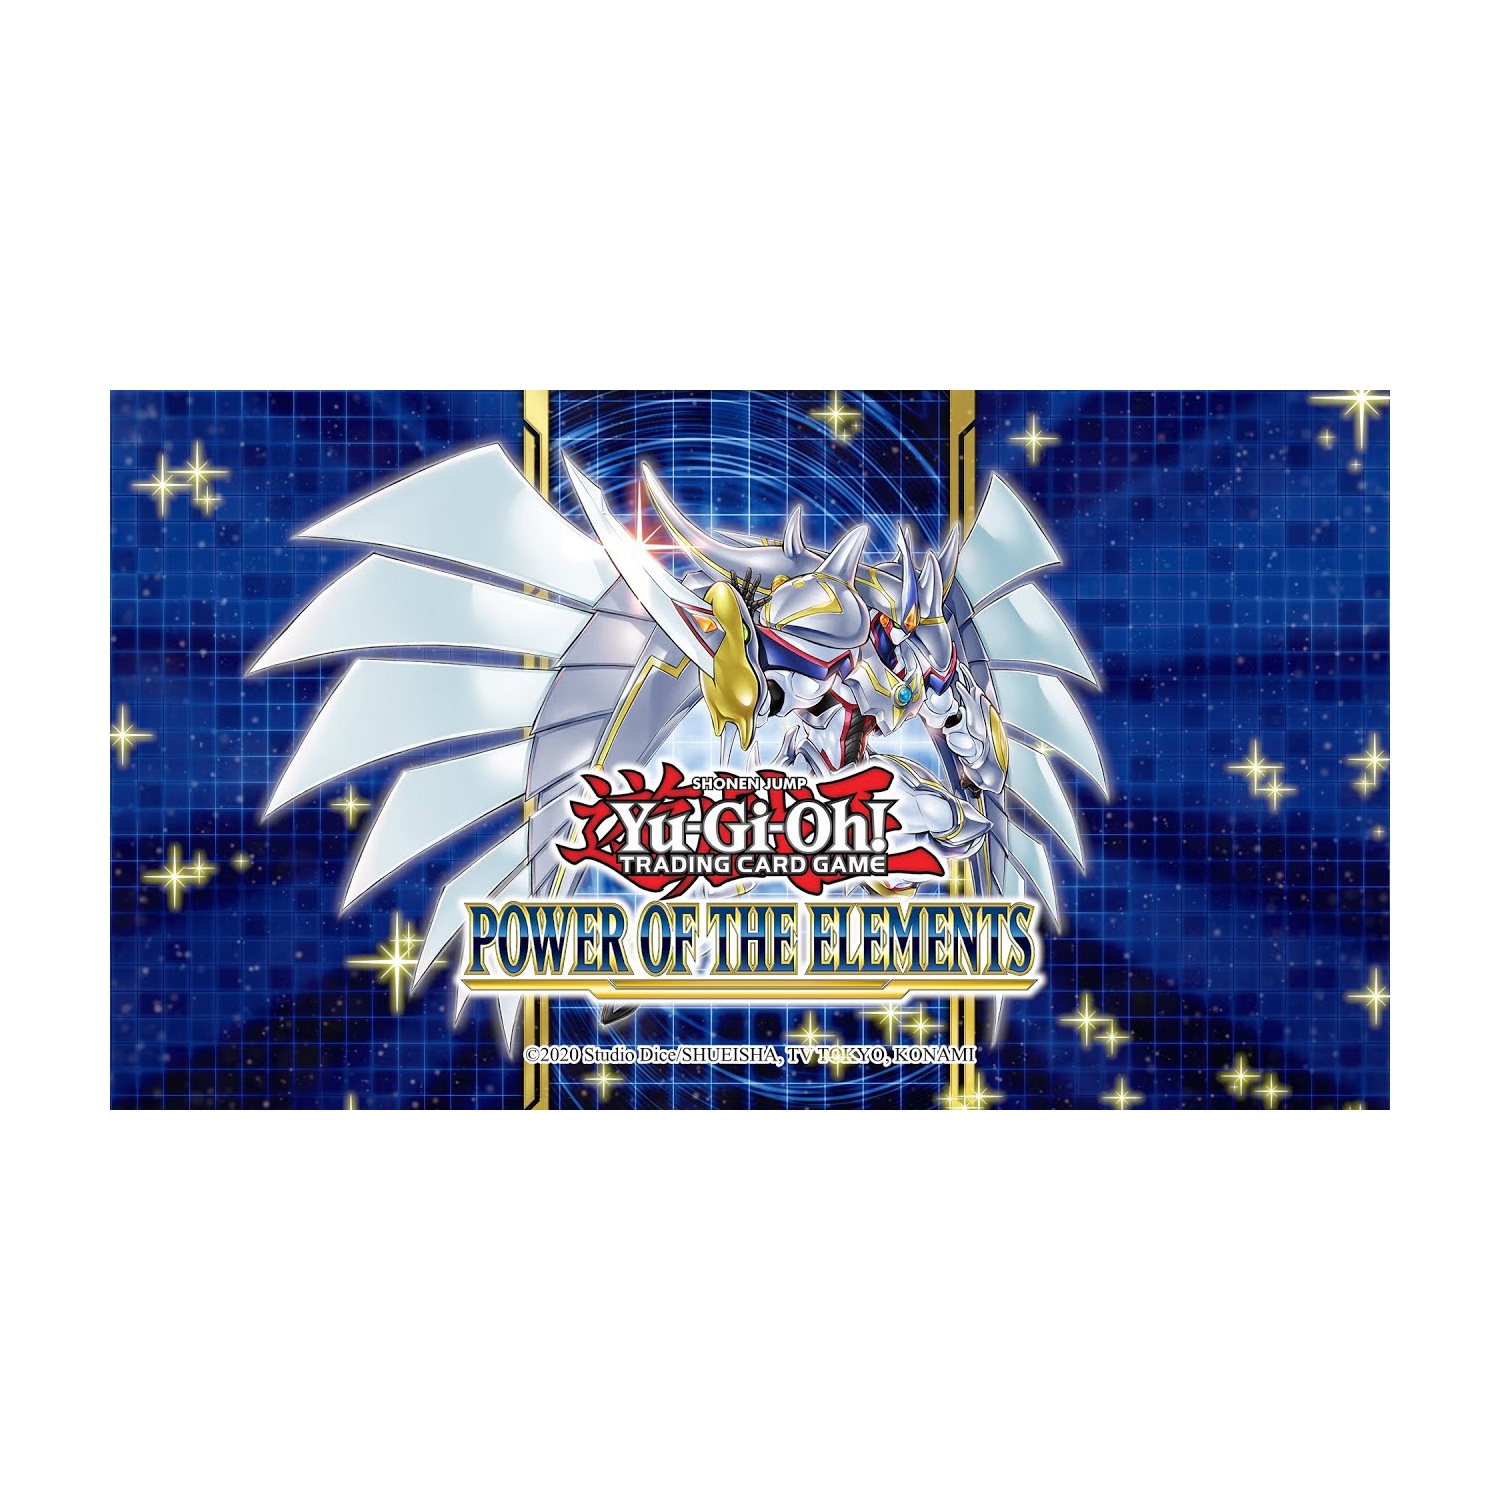 YuGiOh! Trading Card Game: Power of the Elements Booster Box Yu-Gi